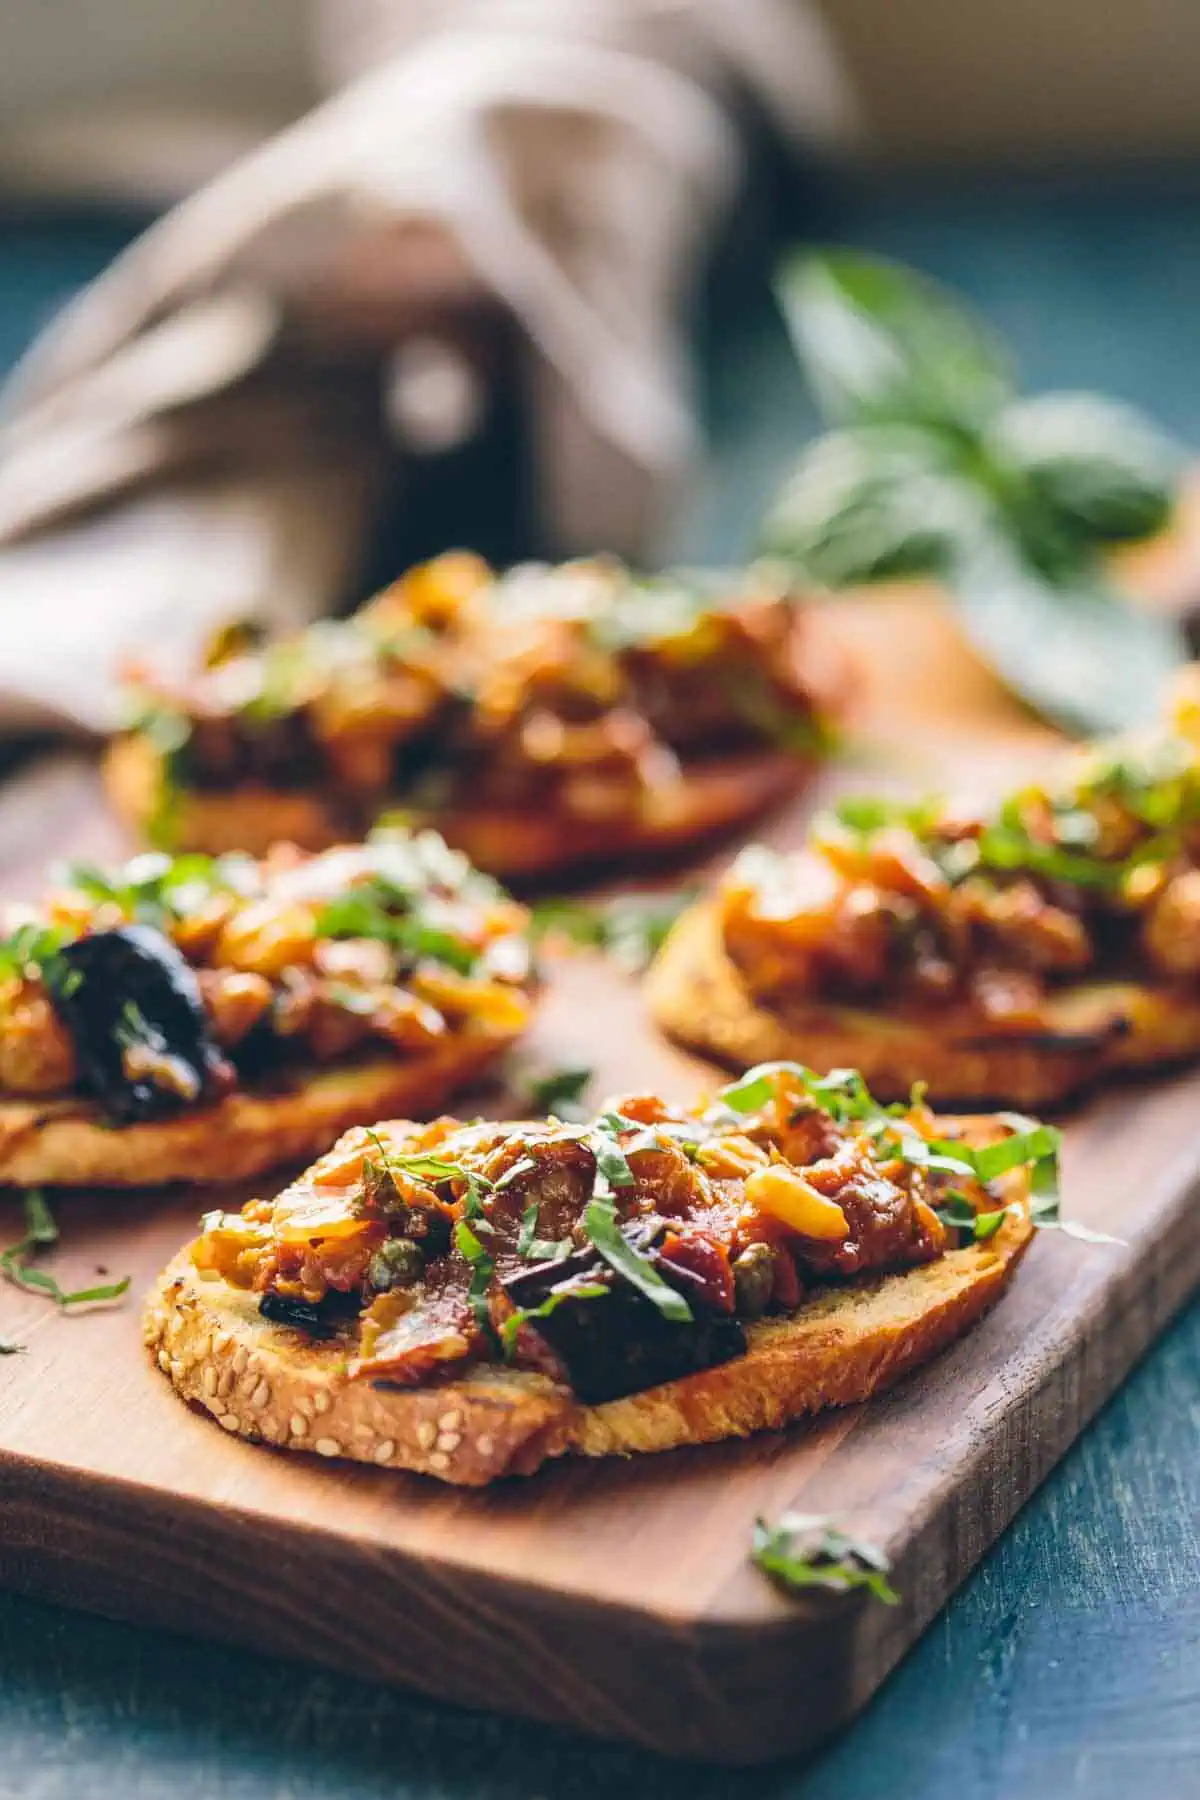 A serving tray of crostini topped with caponata with pine nuts and raisins.